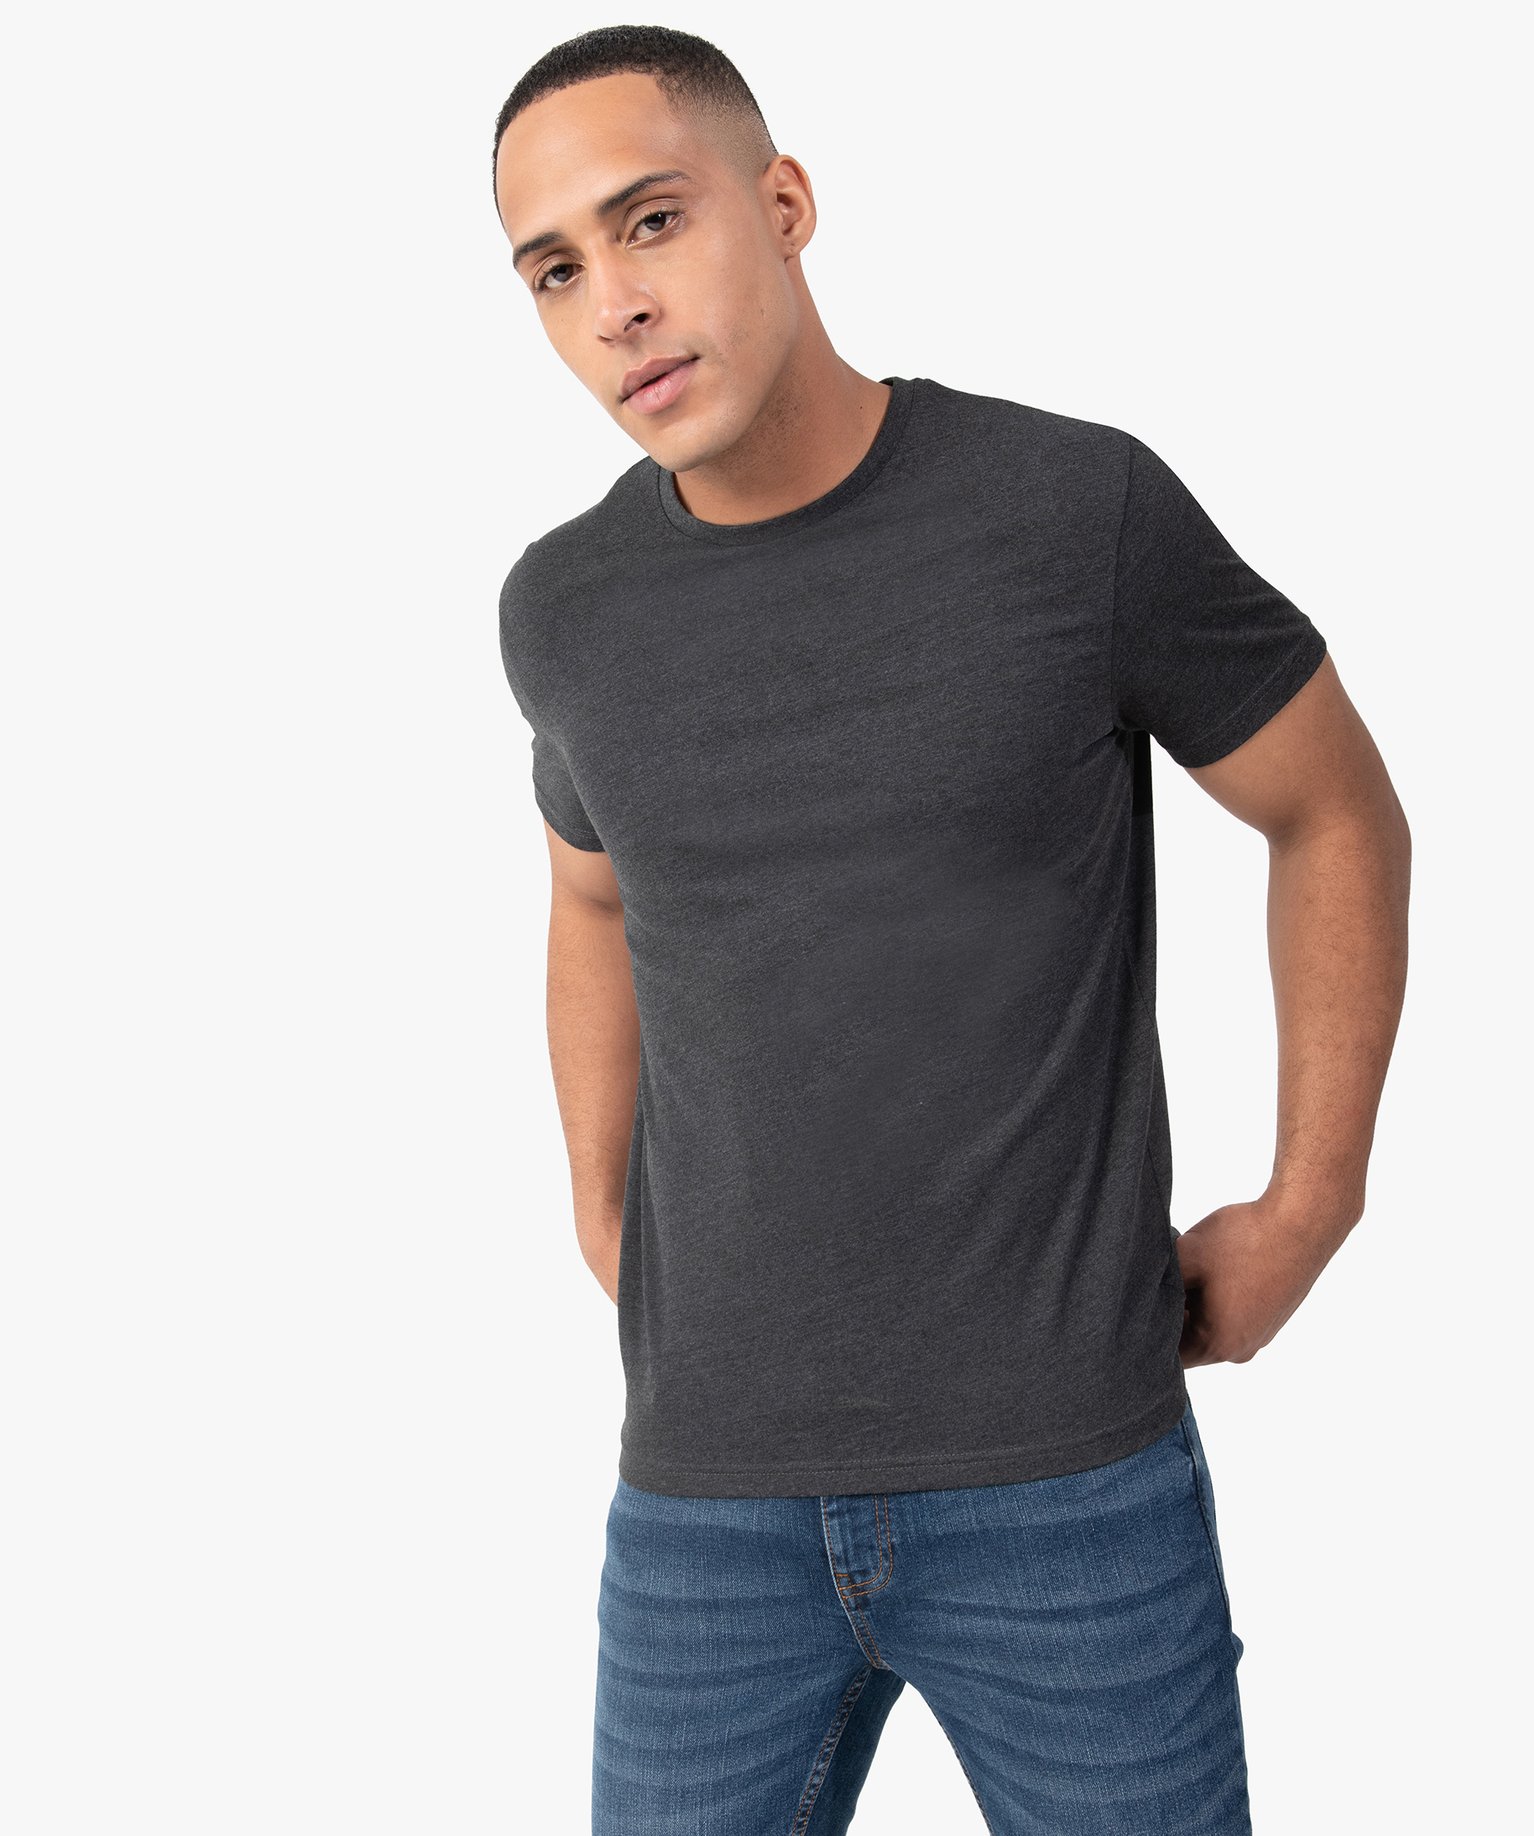 tee-shirt homme a manches courtes et col rond gris tee-shirts